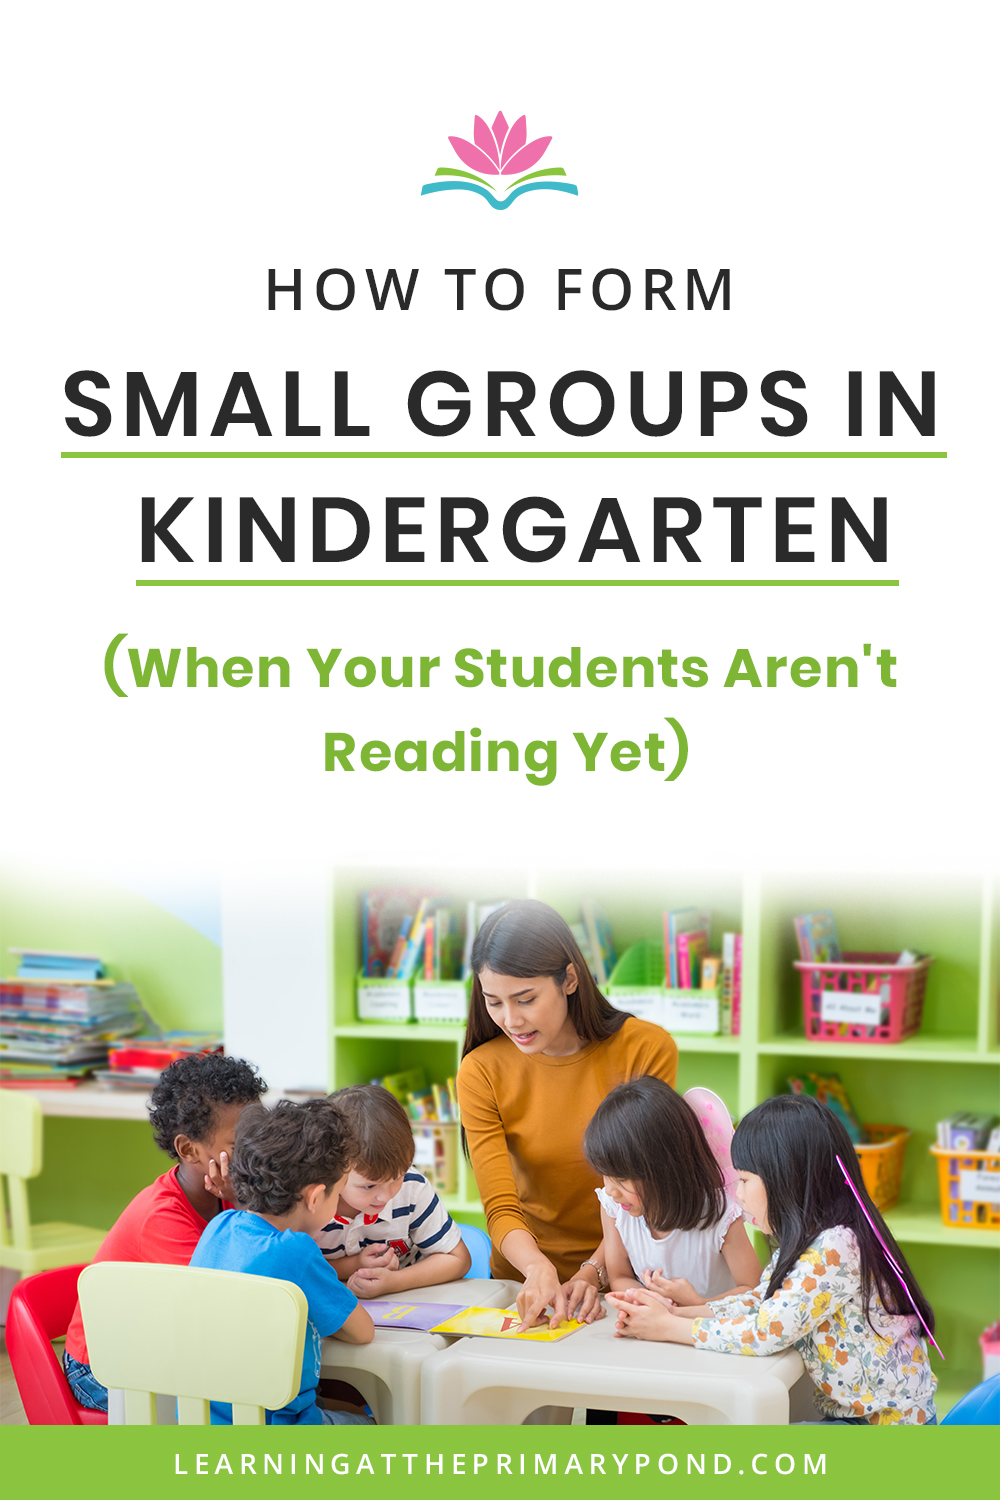 How To Form Small Groups In Kindergarten (When Your Students Aren’t Reading Yet)